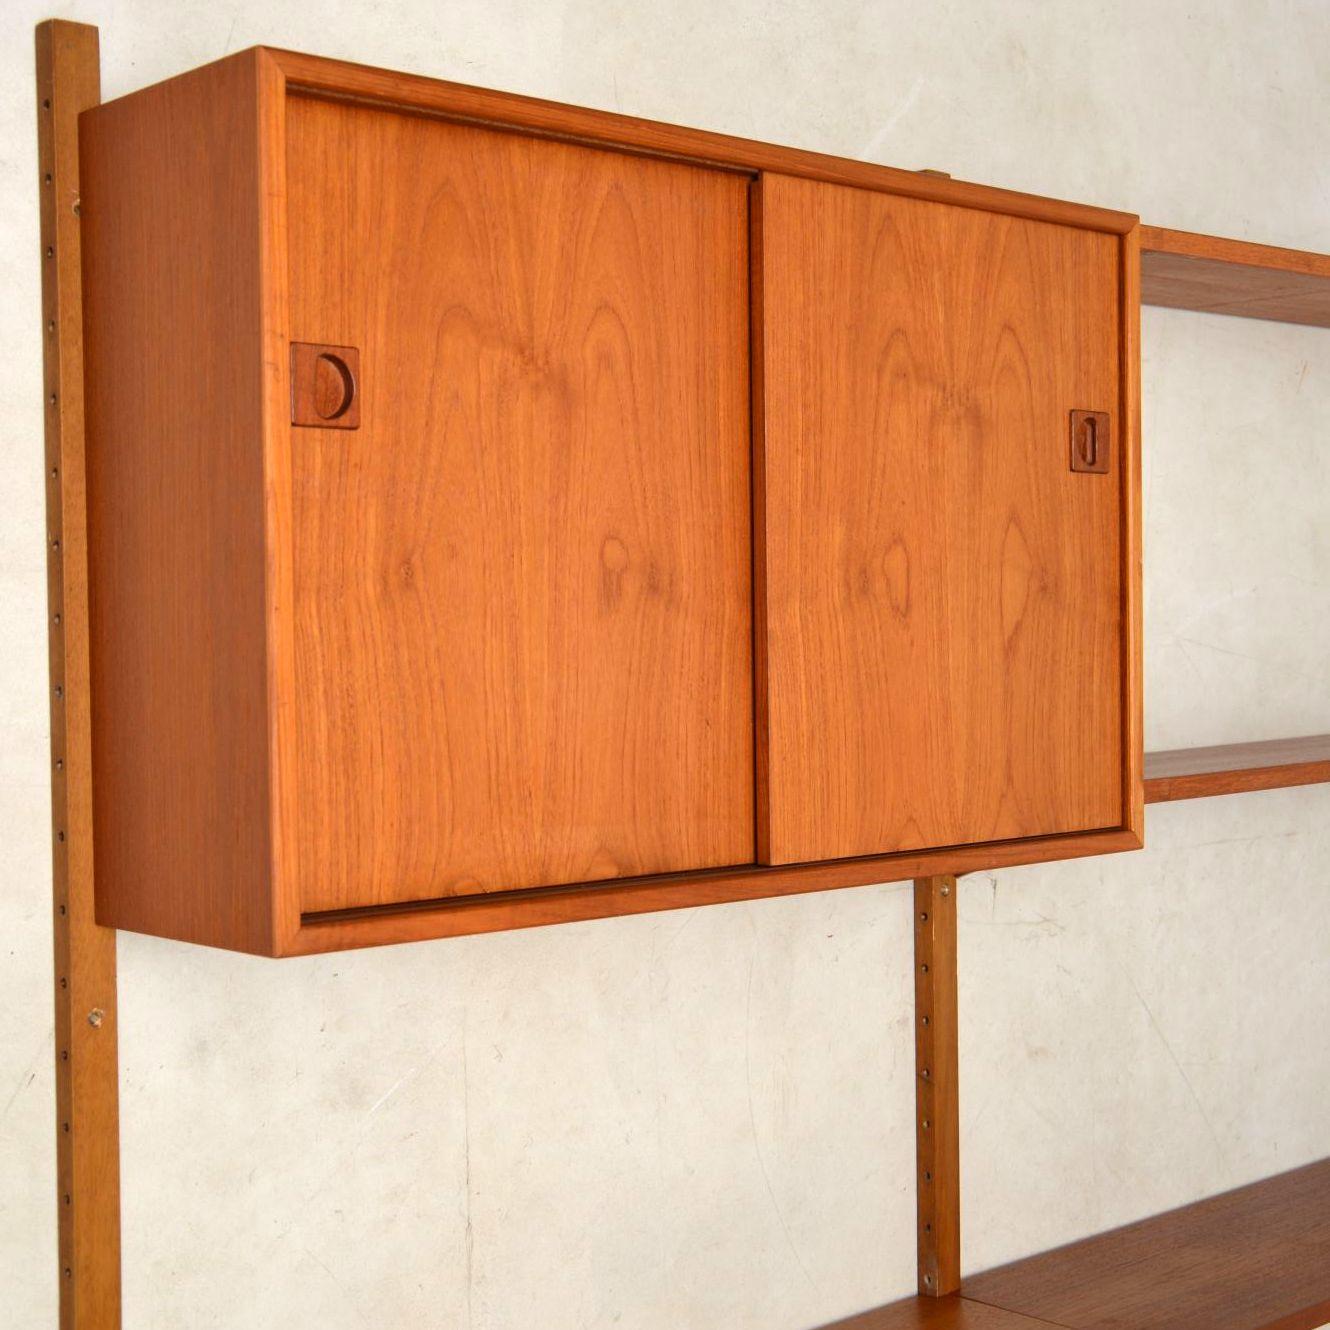 A wonderful Danish vintage PS wall unit in teak, this dates from the 1960s. The condition is excellent for its age, there is hardly any wear to be seen, the teak has a stunning colour and beautiful grain patterns throughout. The units and shelves